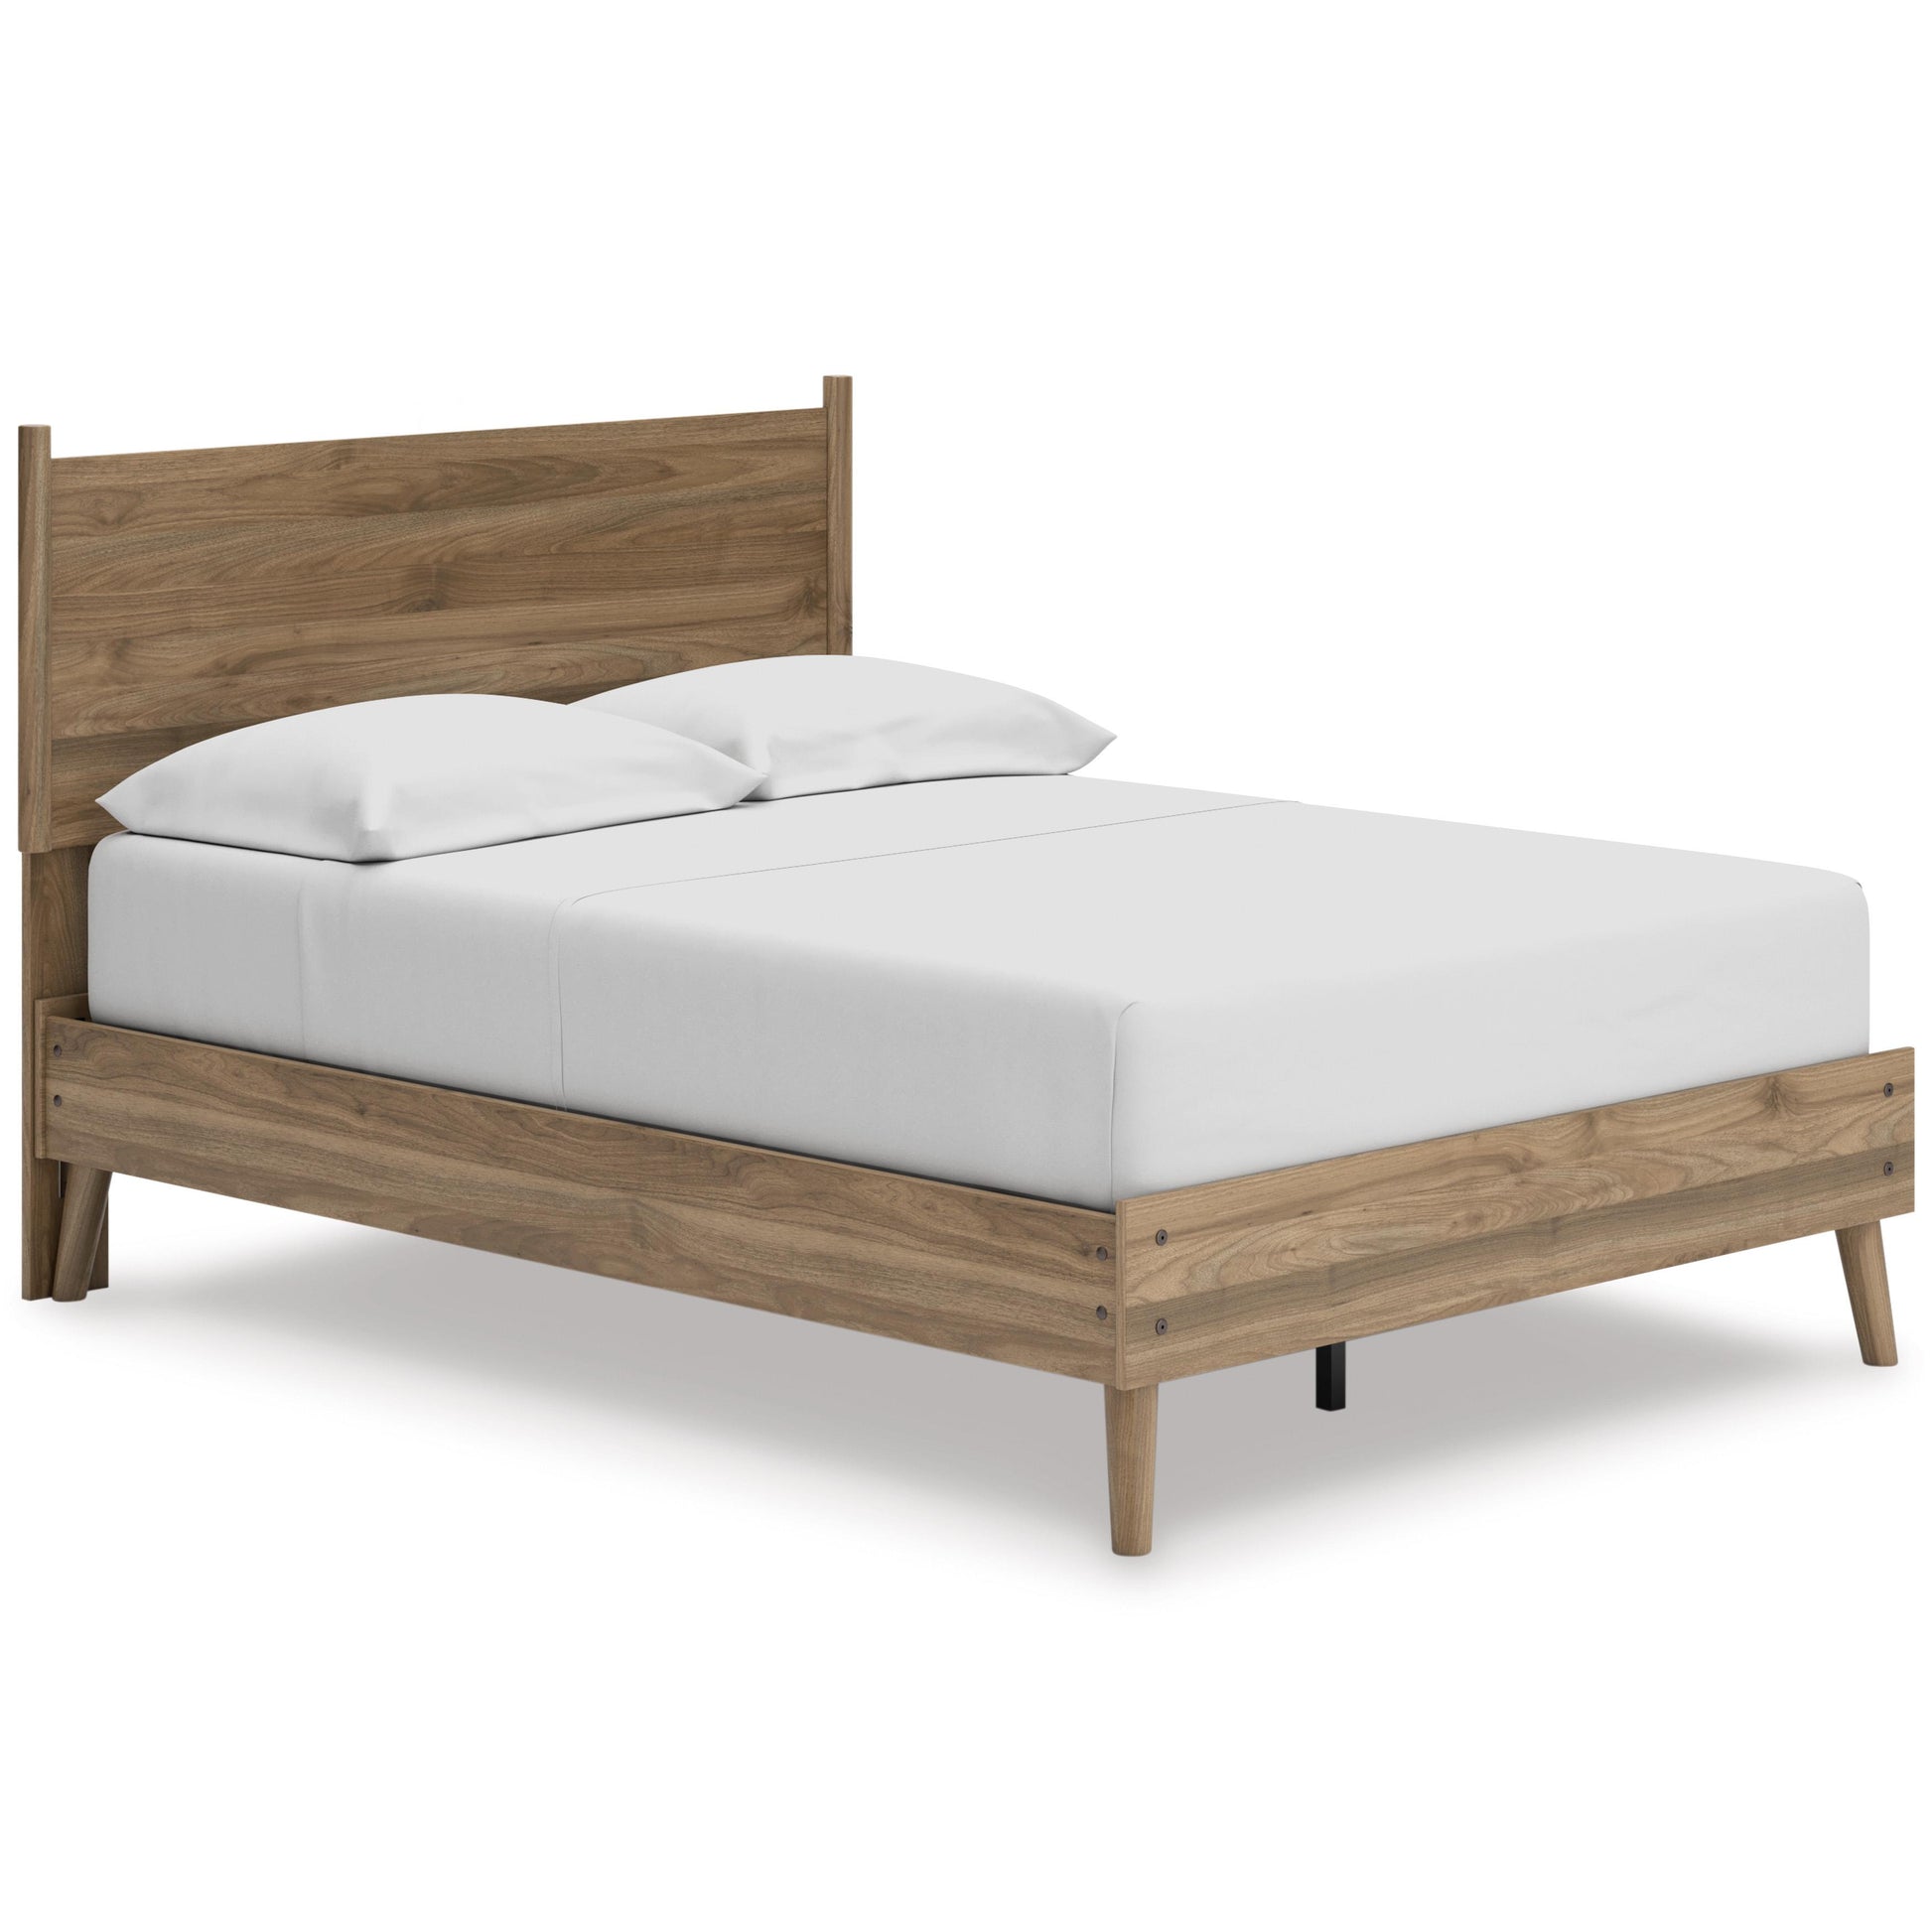 Signature Design by Ashley Kids Beds Bed EB1187-156/EB1187-112 IMAGE 1